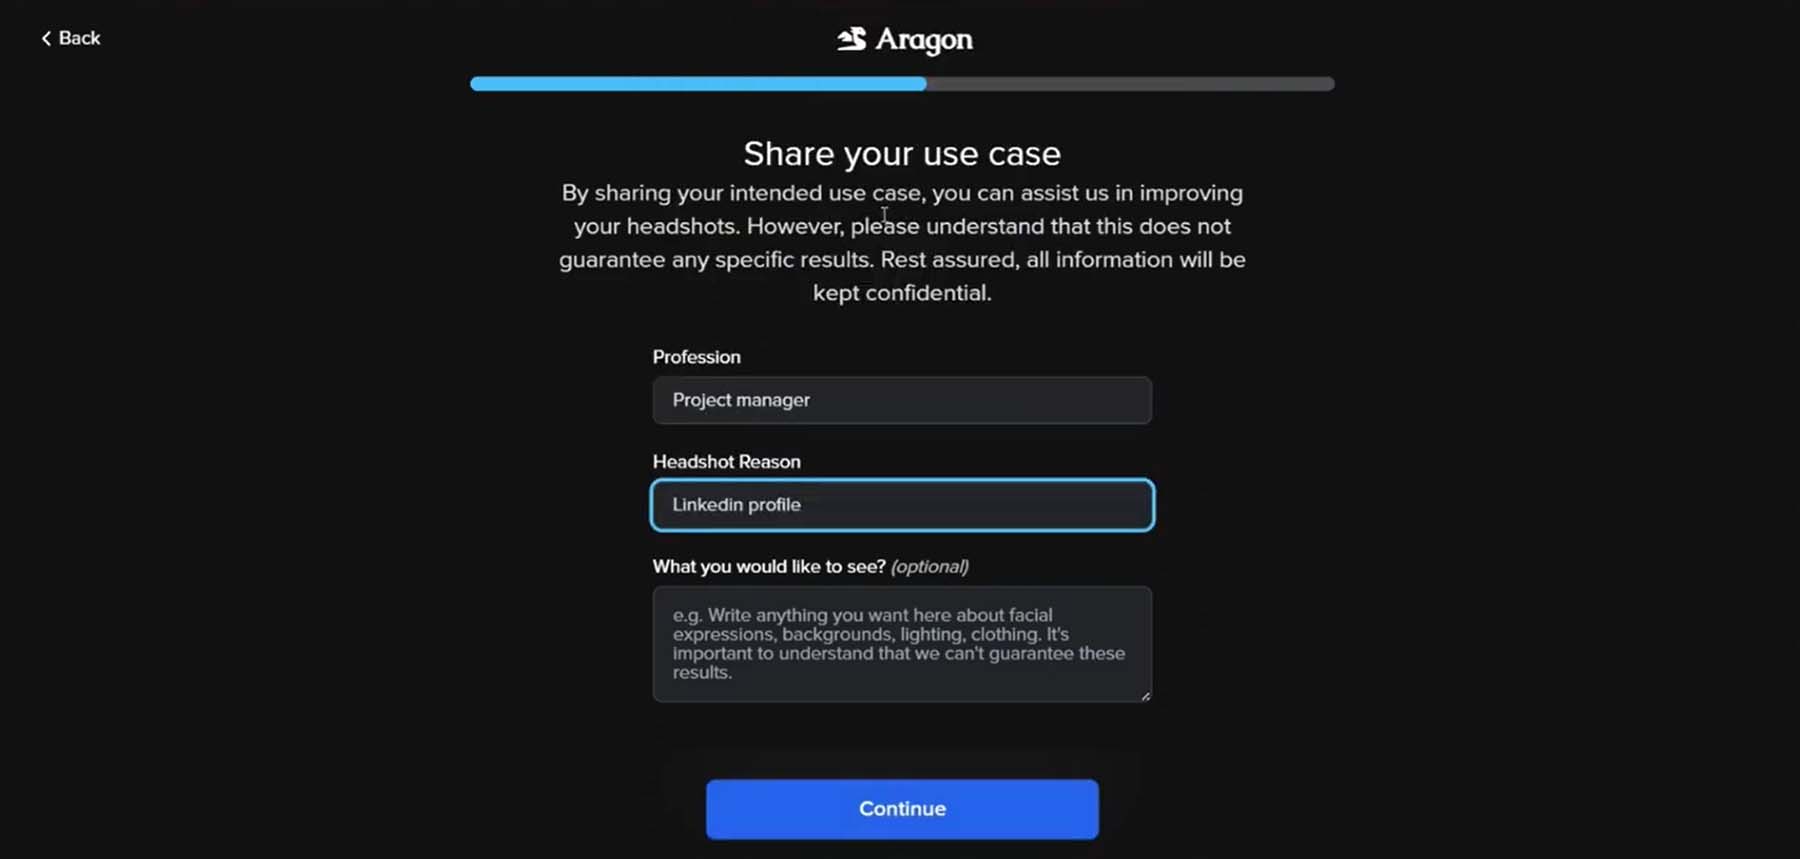 Aragon and it's questionnaire